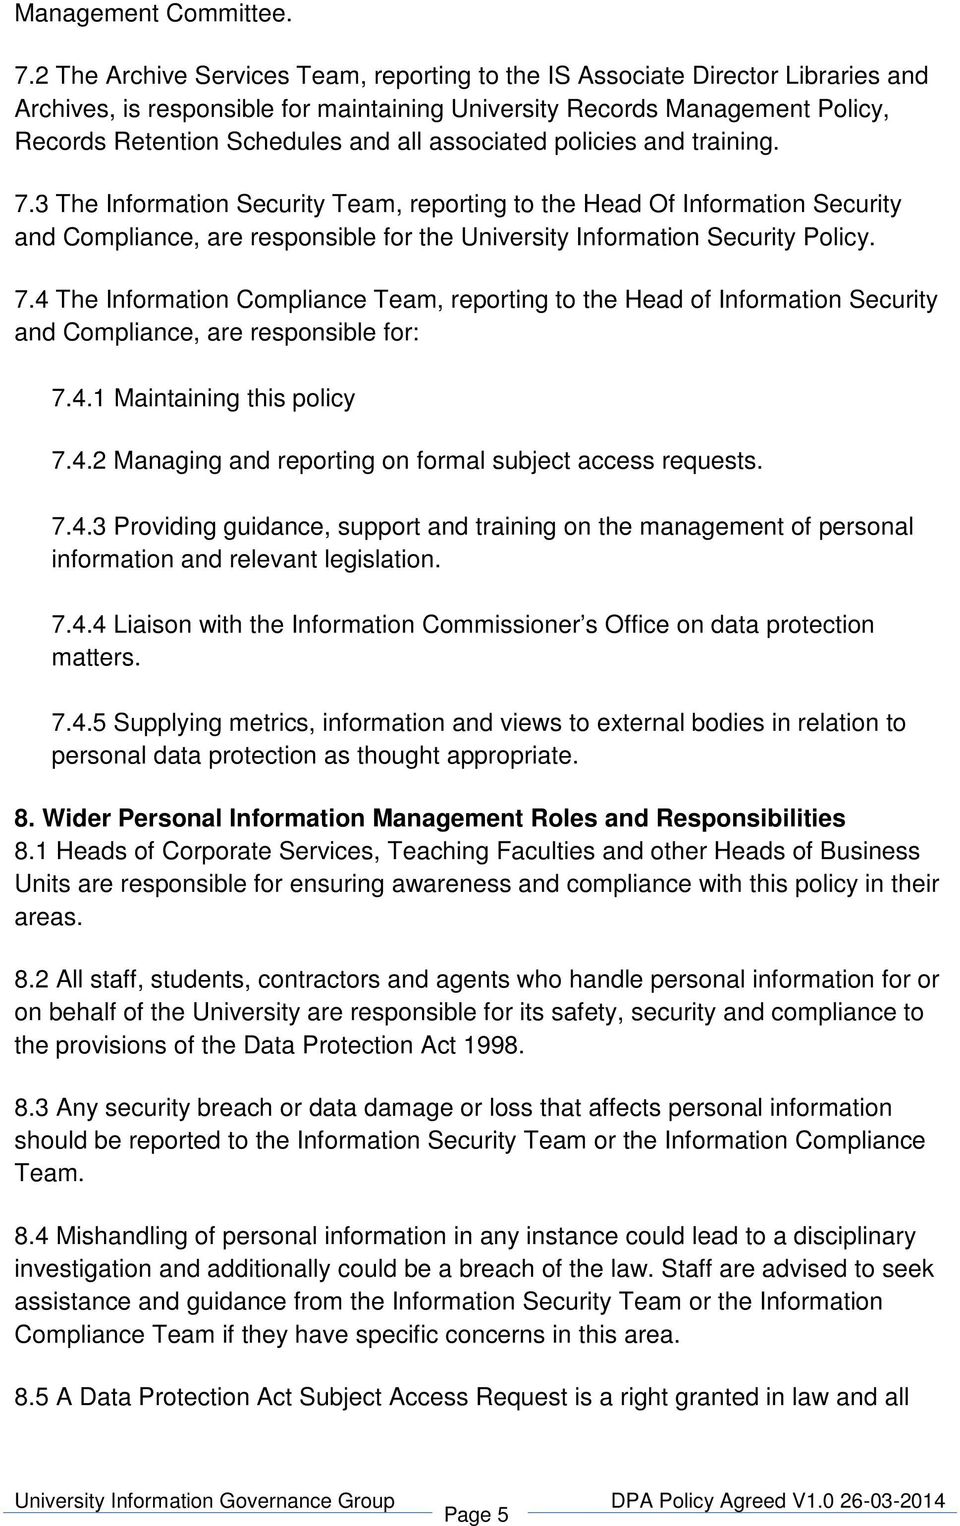 associated policies and training. 7.3 The Information Security Team, reporting to the Head Of Information Security and Compliance, are responsible for the University Information Security Policy. 7.4 The Information Compliance Team, reporting to the Head of Information Security and Compliance, are responsible for: 7.